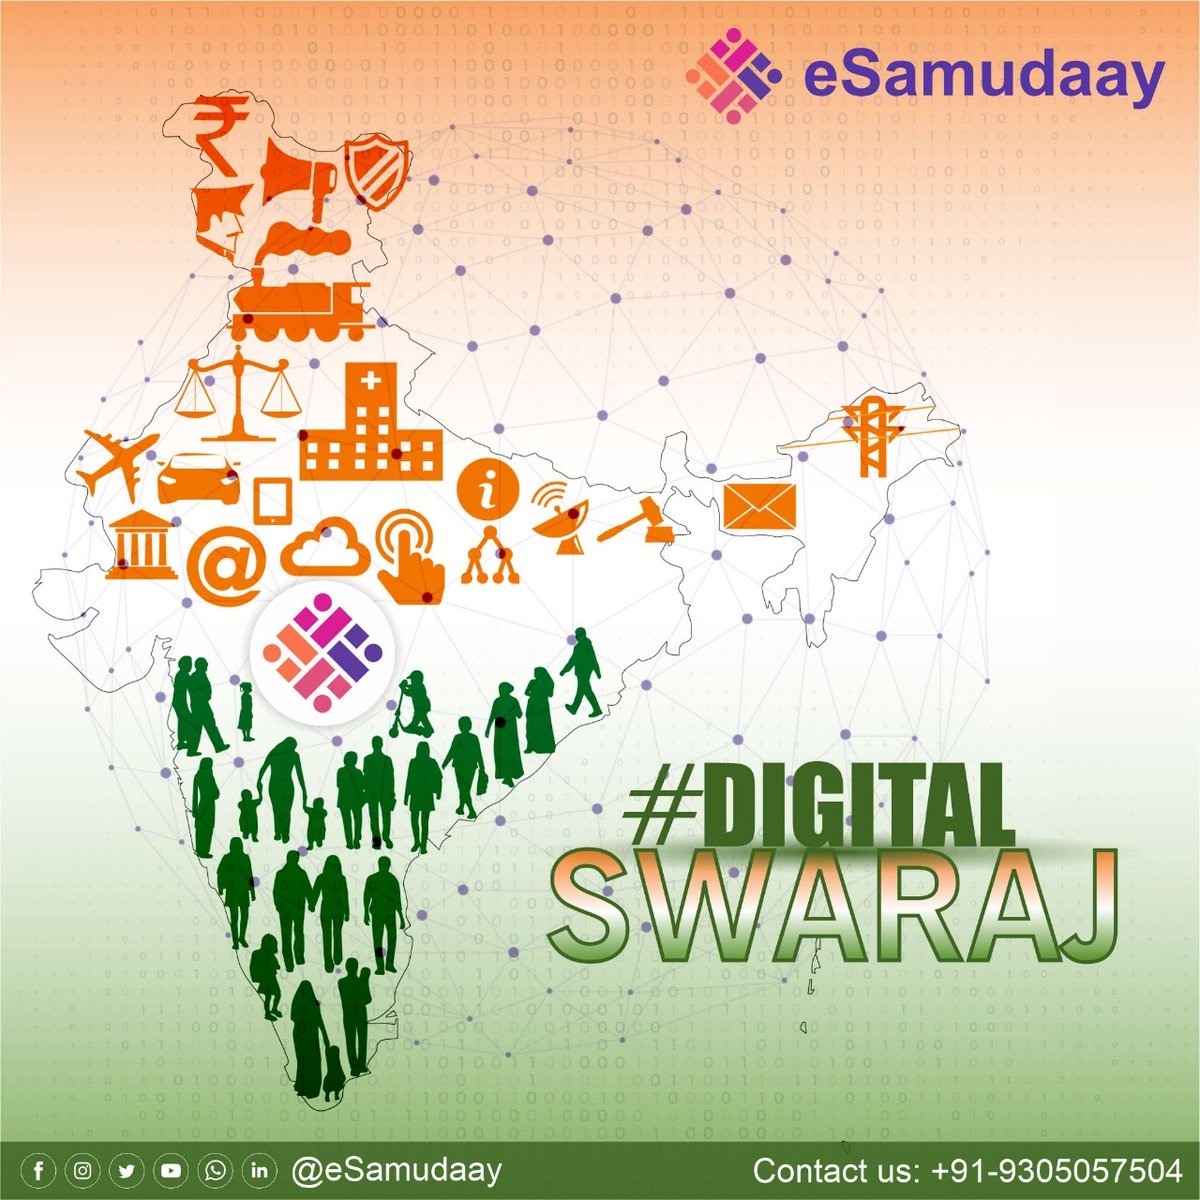 My Government is my friend. I don’t need to hide anything. OpenNetworks bring transparency. Hiding our business from the Government is a Colonial hangover. I am breaking free and doing ALL my business on ONDC. #DigitalSwaraj #AzadiKaAmritMahotsav #Aatmnirbharbharat #ONDC_official